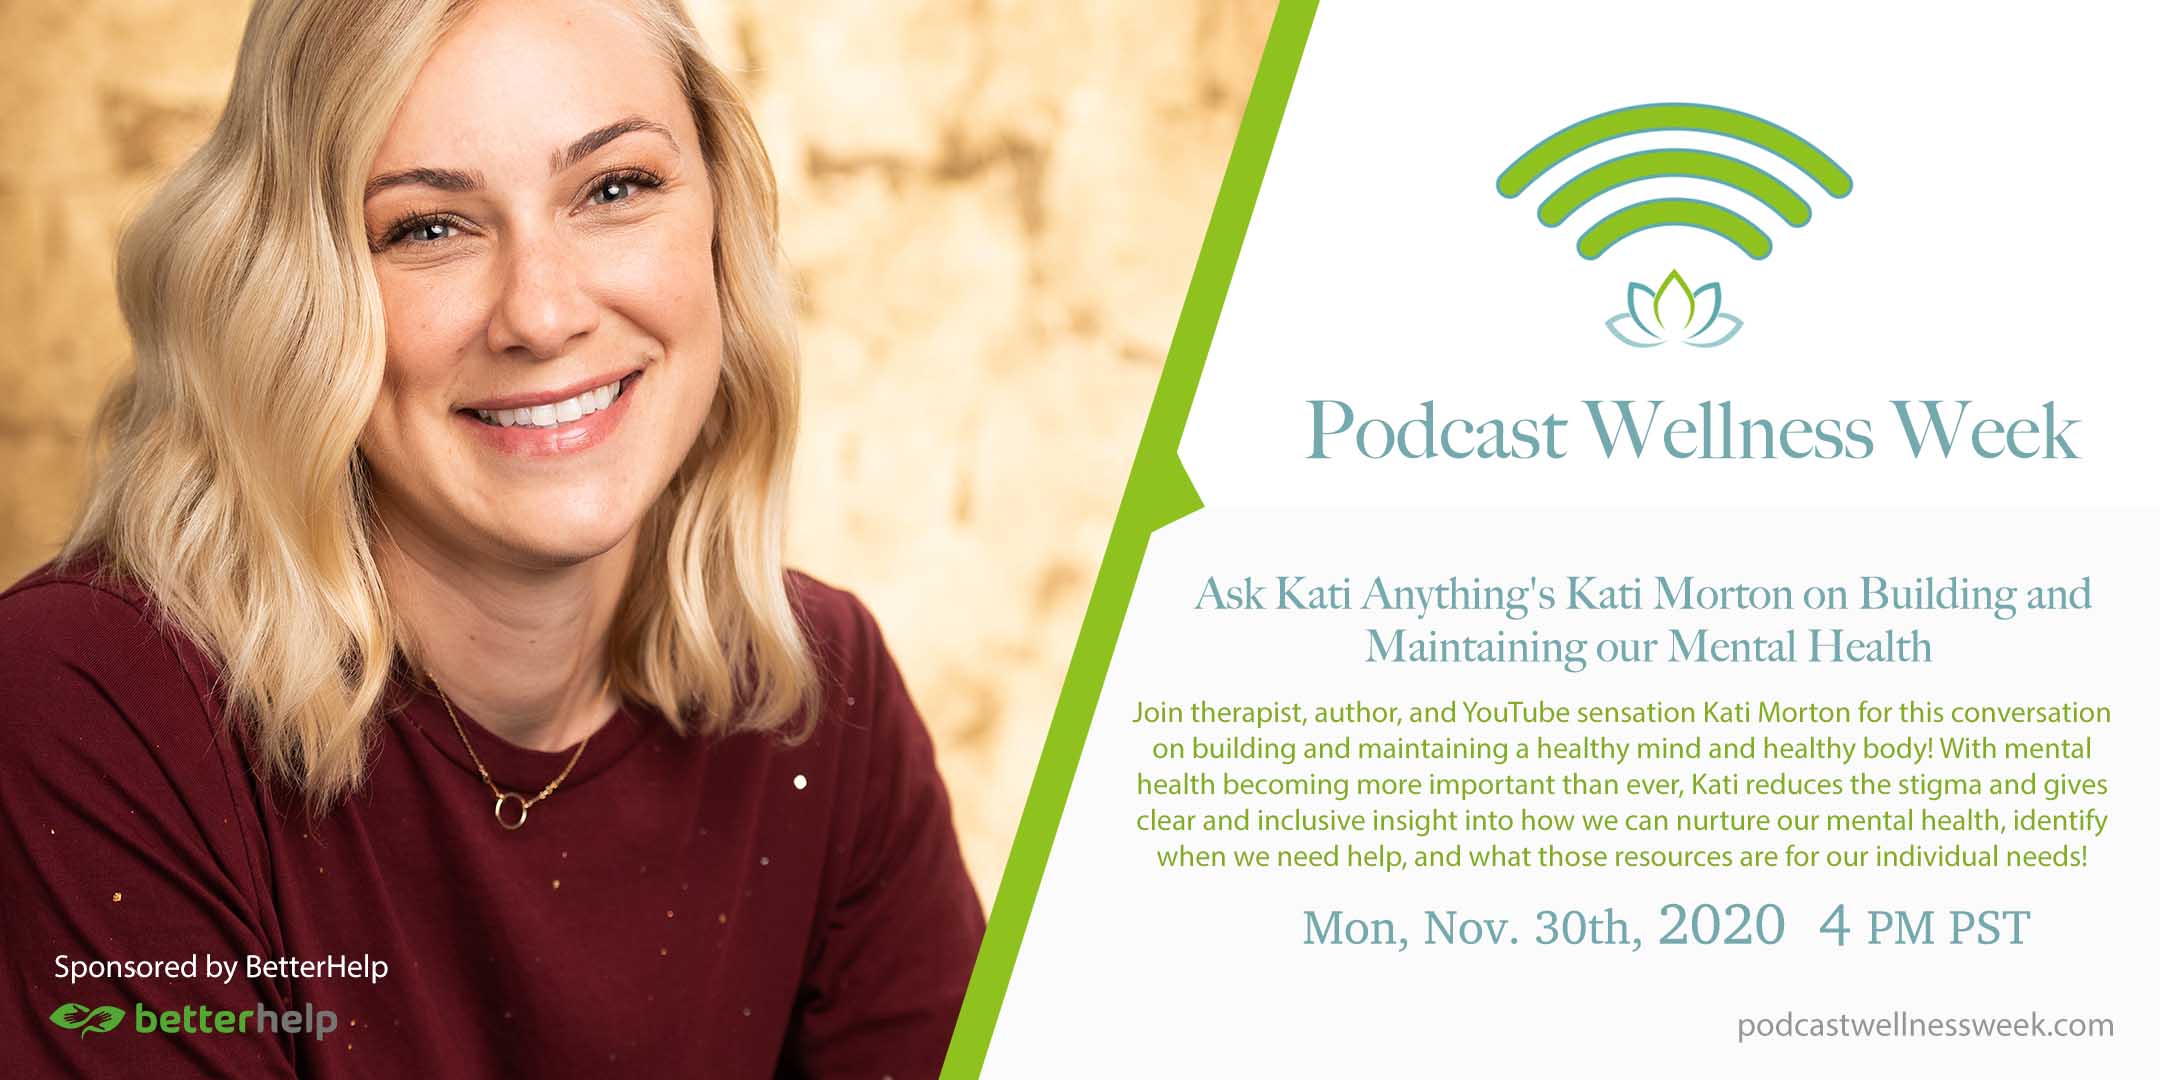 Ask Kati Anything's Kati Morton on Building and Maintaining our Mental Health